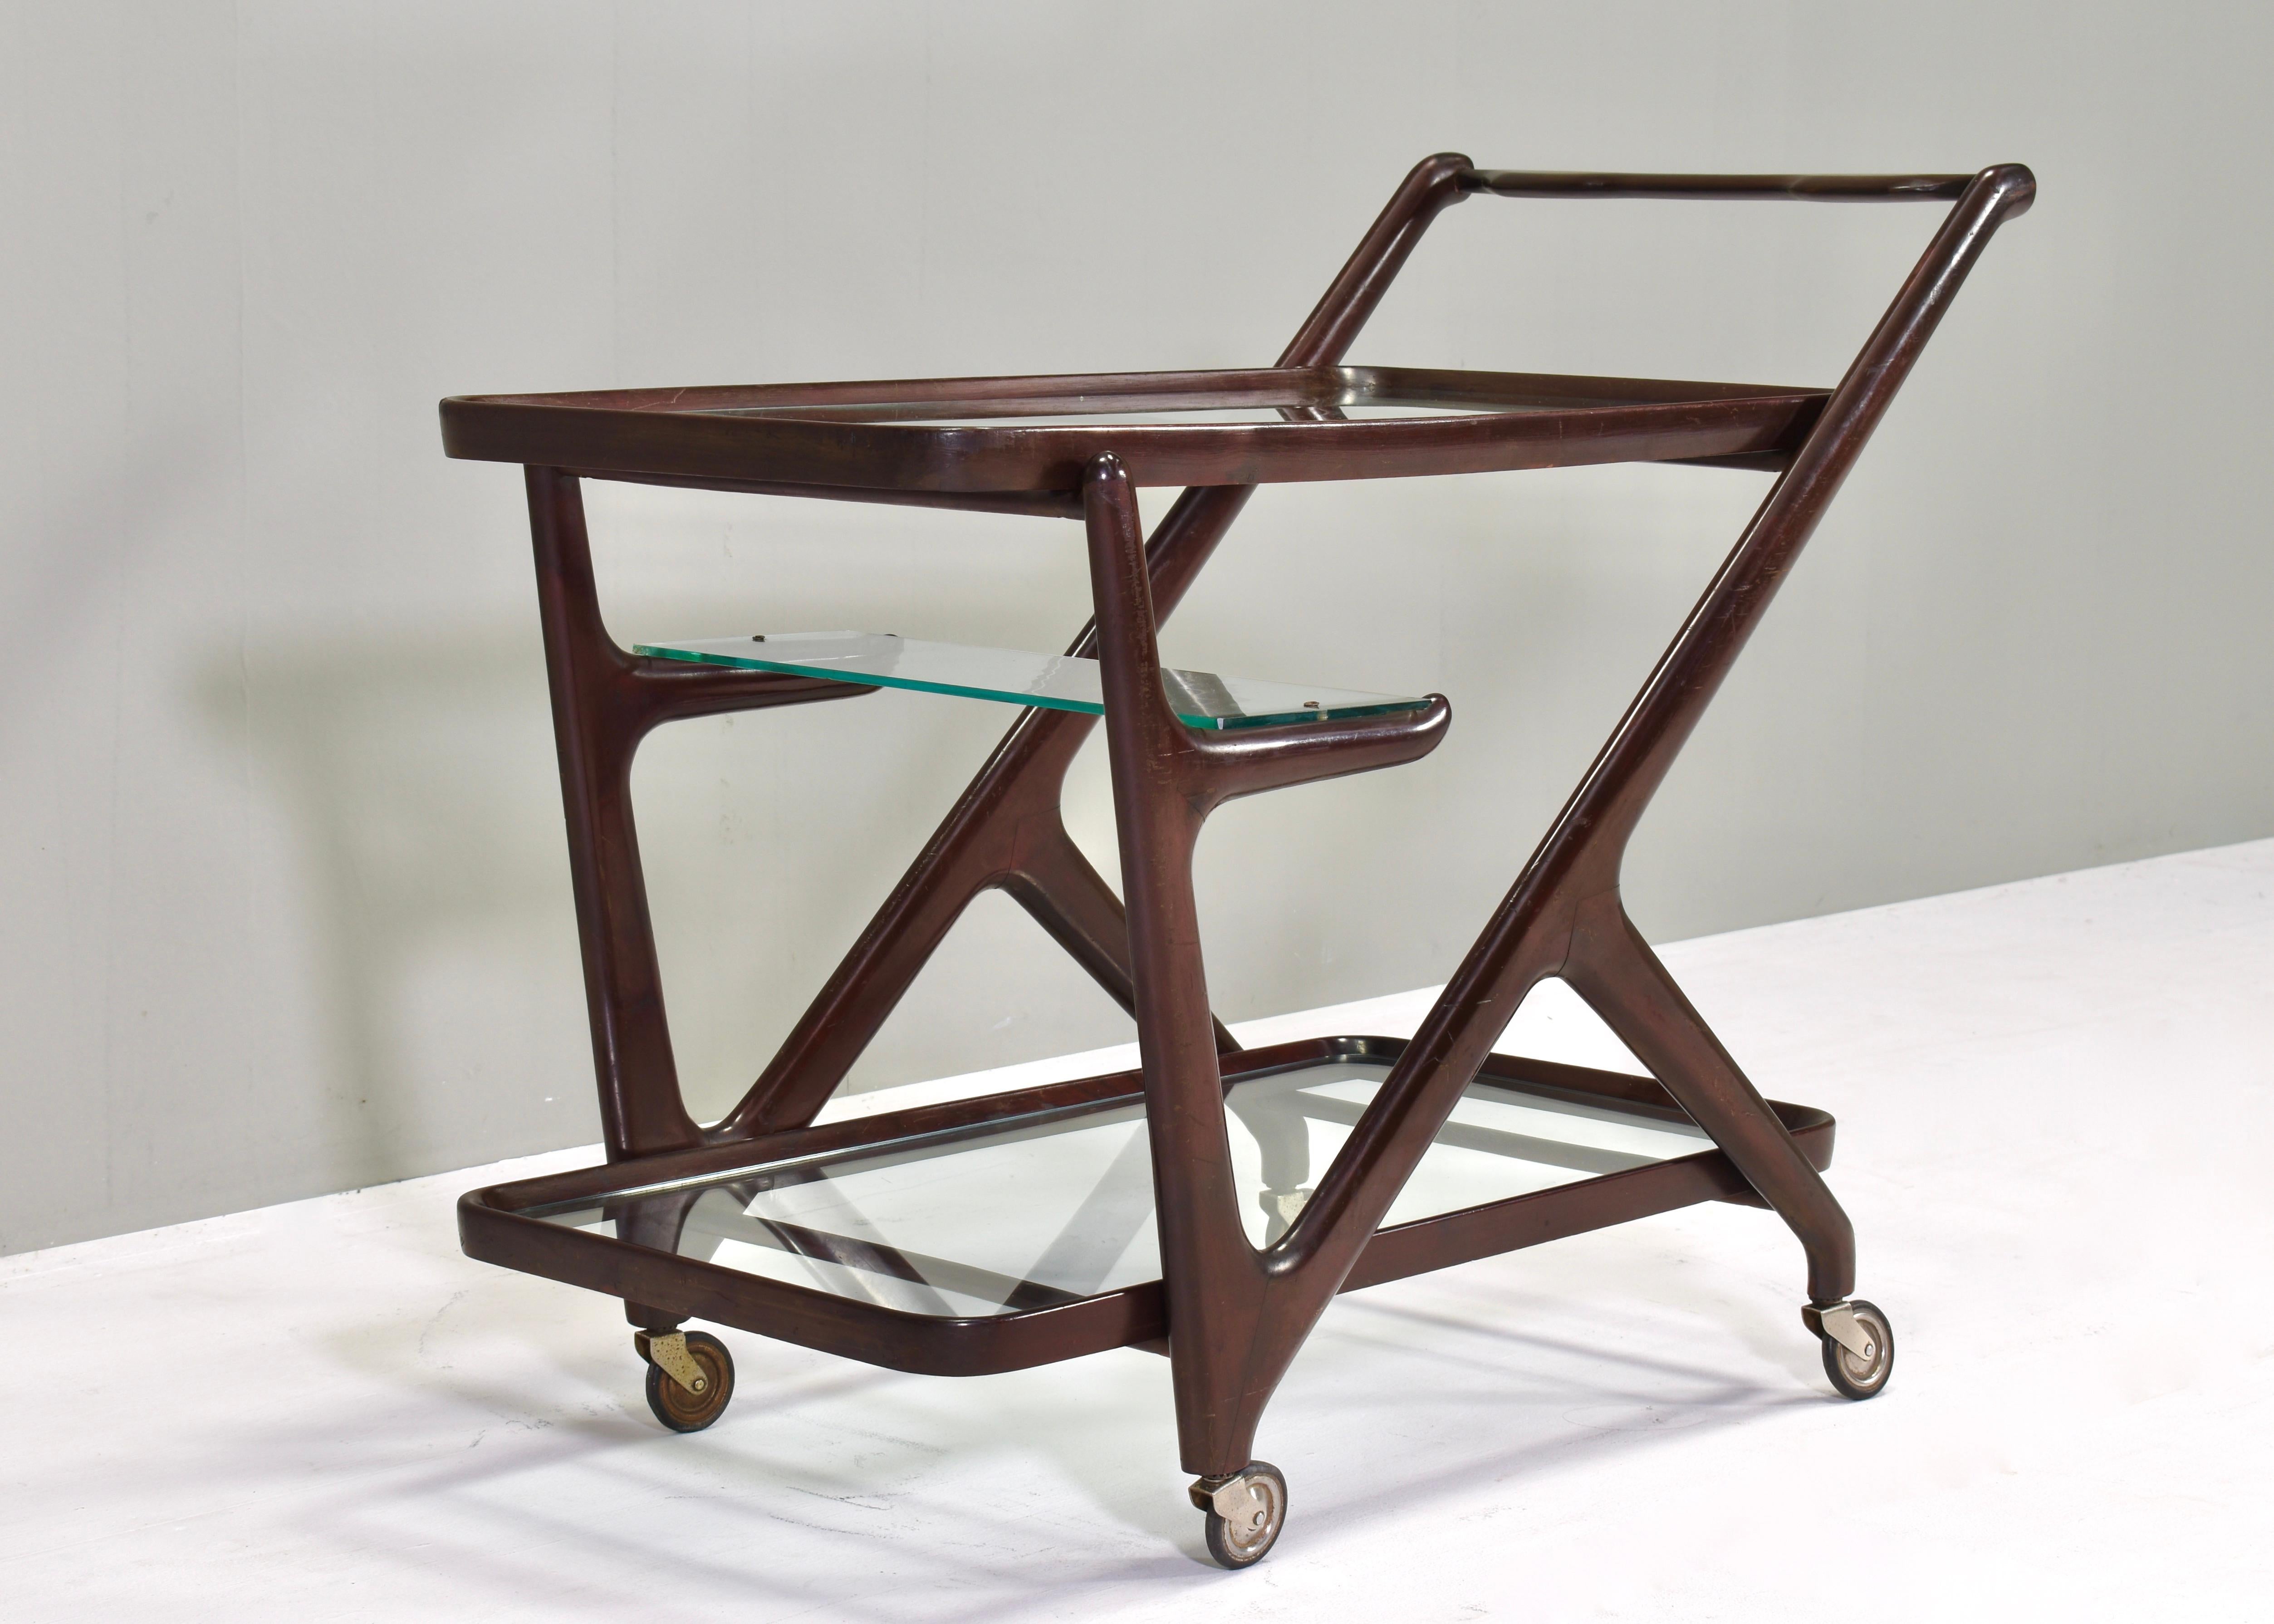 Designer: Cesare Lacca
Manufacturer:
Country: Italy
Model: Bar cart / Tea trolley / Serving cart 
Design period: 1950’s
Date of manufacturing: circa 1950
Size wdh in cm: 83x43x69 centimetre
Material: Stained wood / Glass
Condition: Fair /